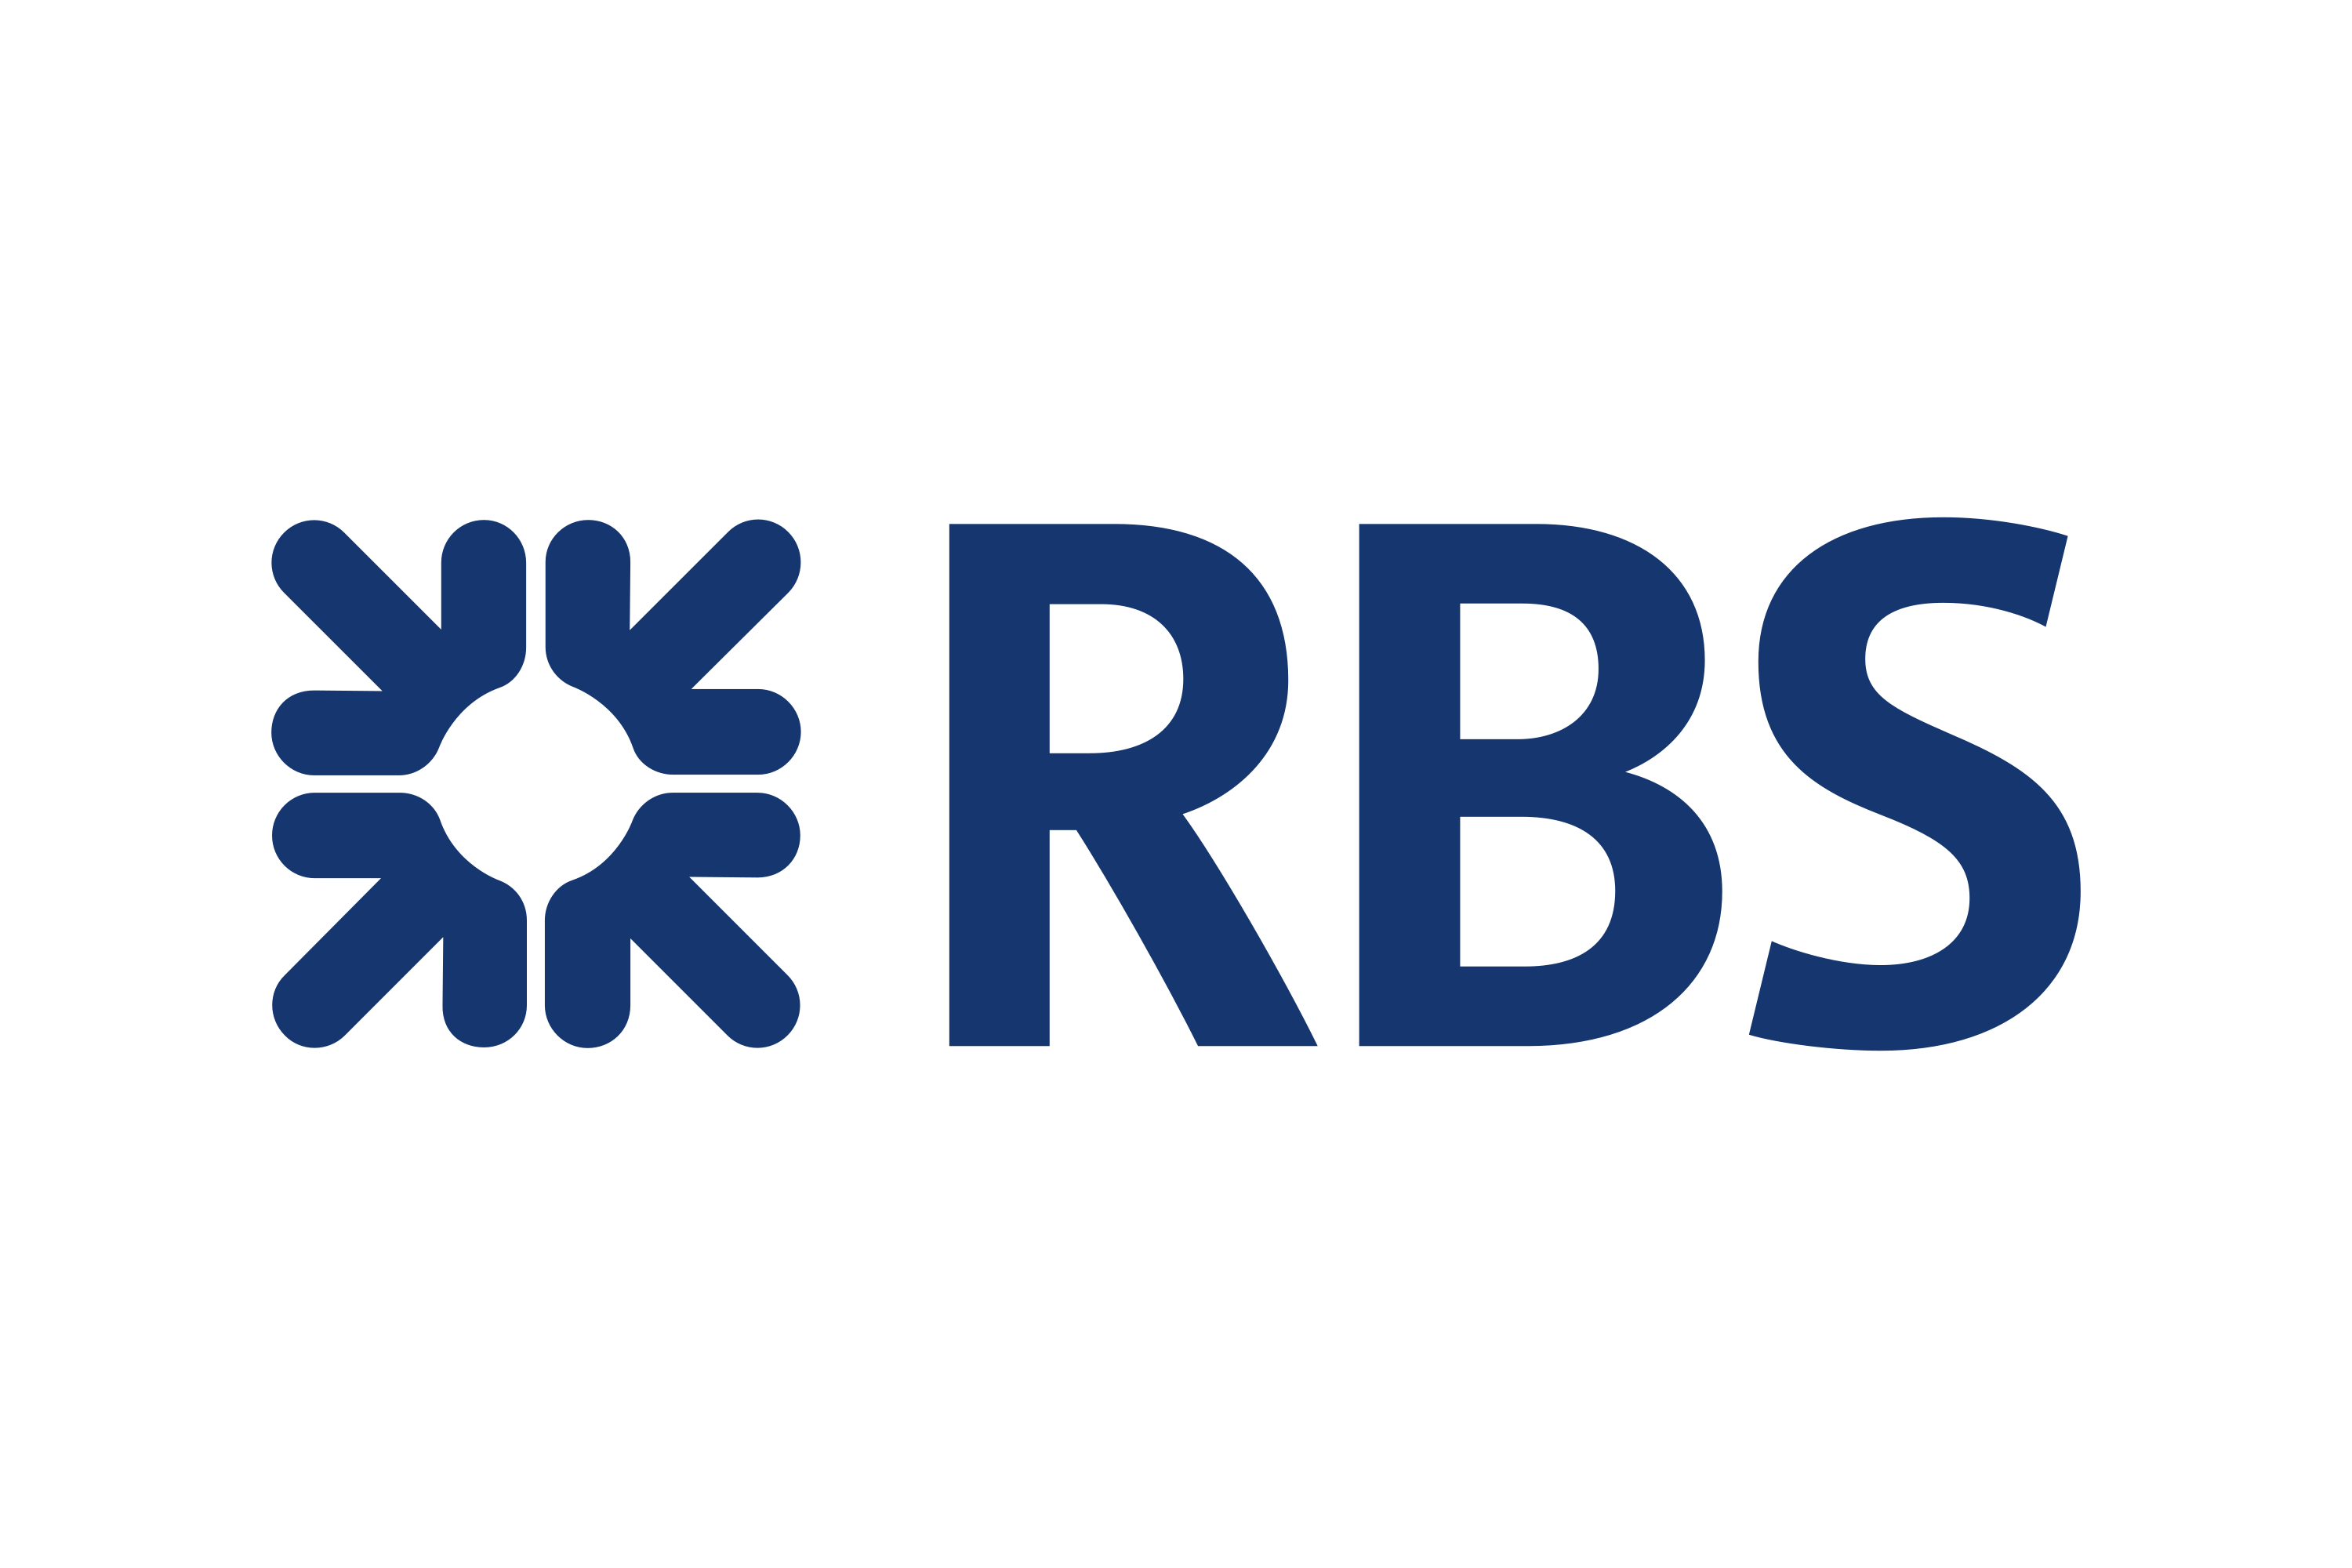 Download The Royal Bank of Scotland Group (RBS Group) Logo in SVG ...